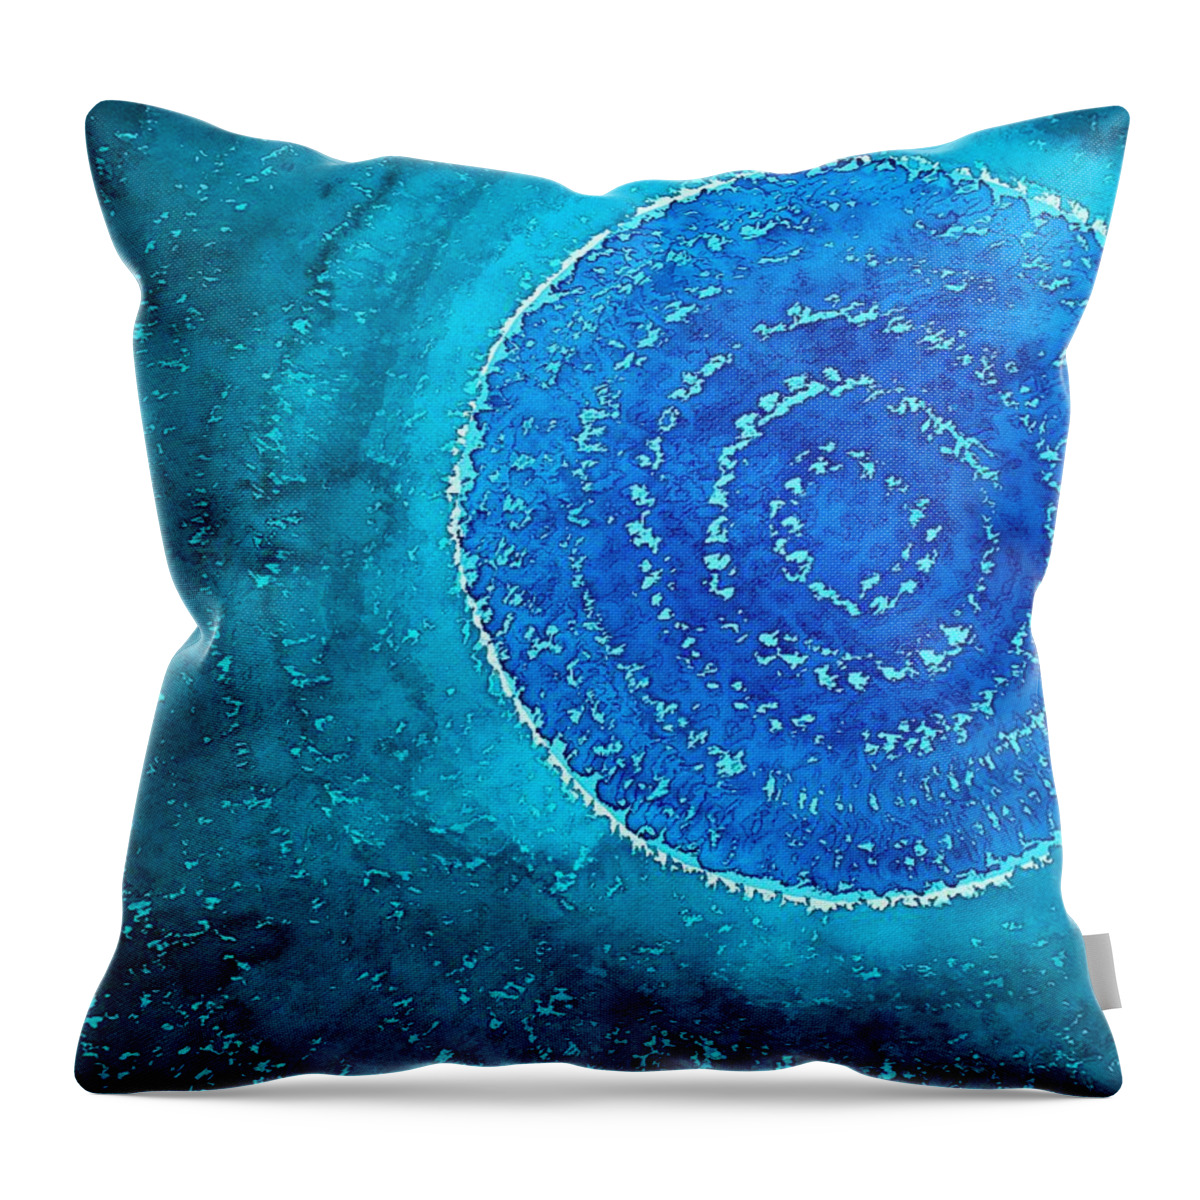 Blue Throw Pillow featuring the painting Blue World original painting by Sol Luckman